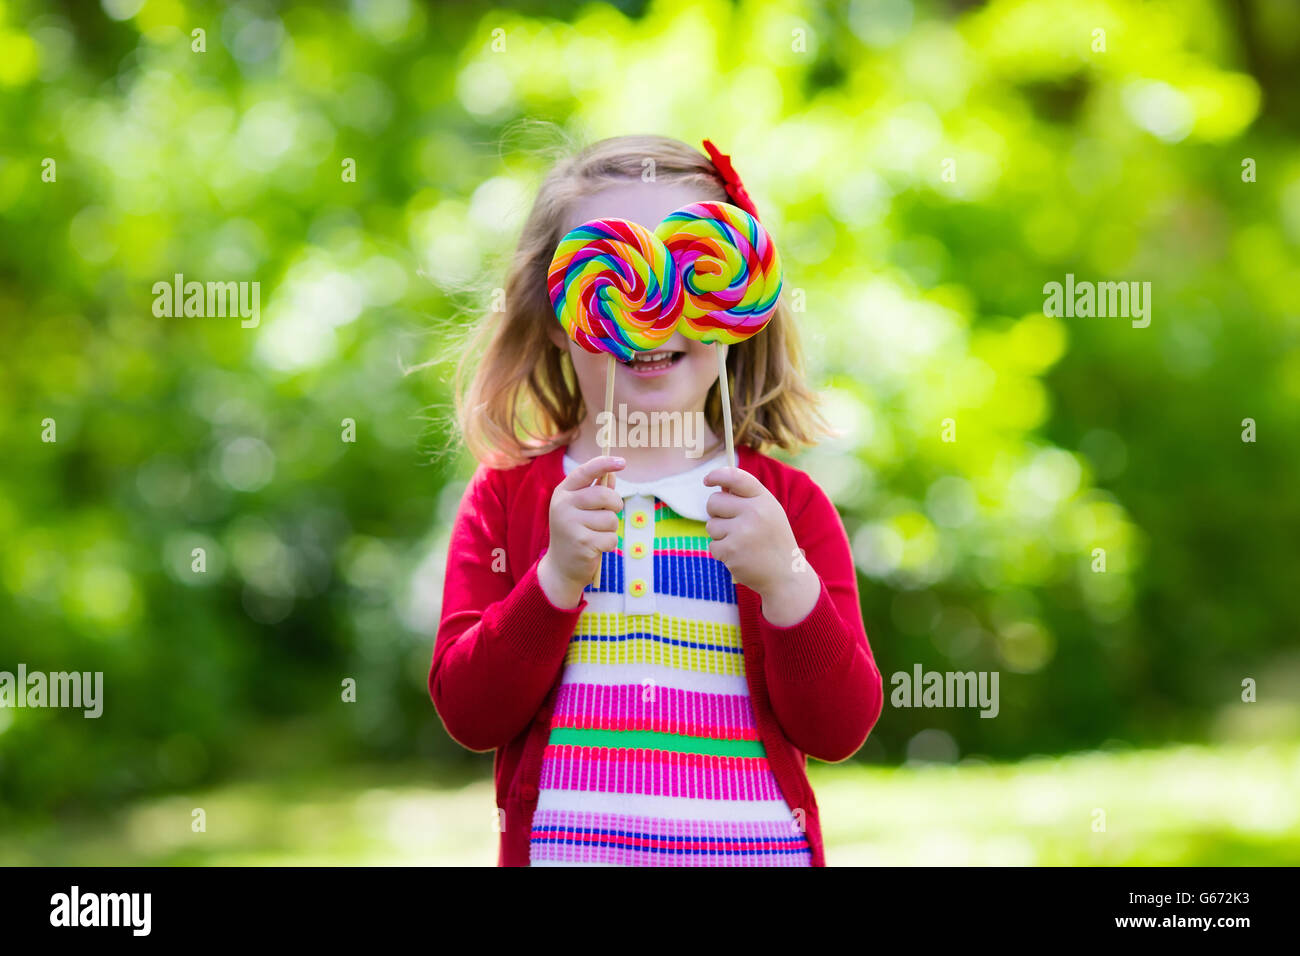 Cute little girl with big colorful lollipop. Child eating sweet candy bar. Sweets for young kids. Summer outdoor fun Stock Photo